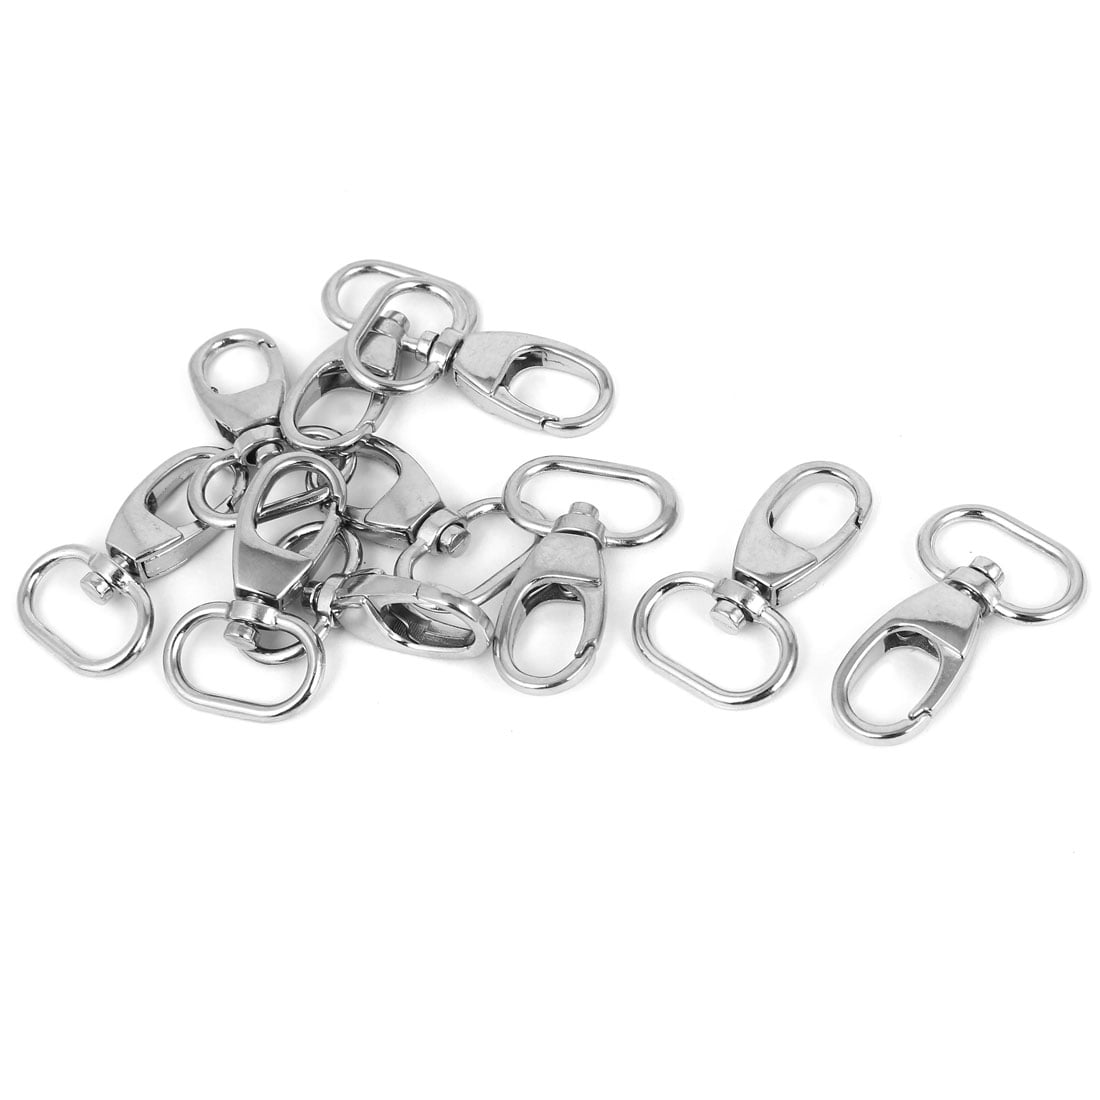 O-RING ~ 42mm Long Hooks Key Ring Chain SILVER Stainless Steel CARABINER CLIPS 